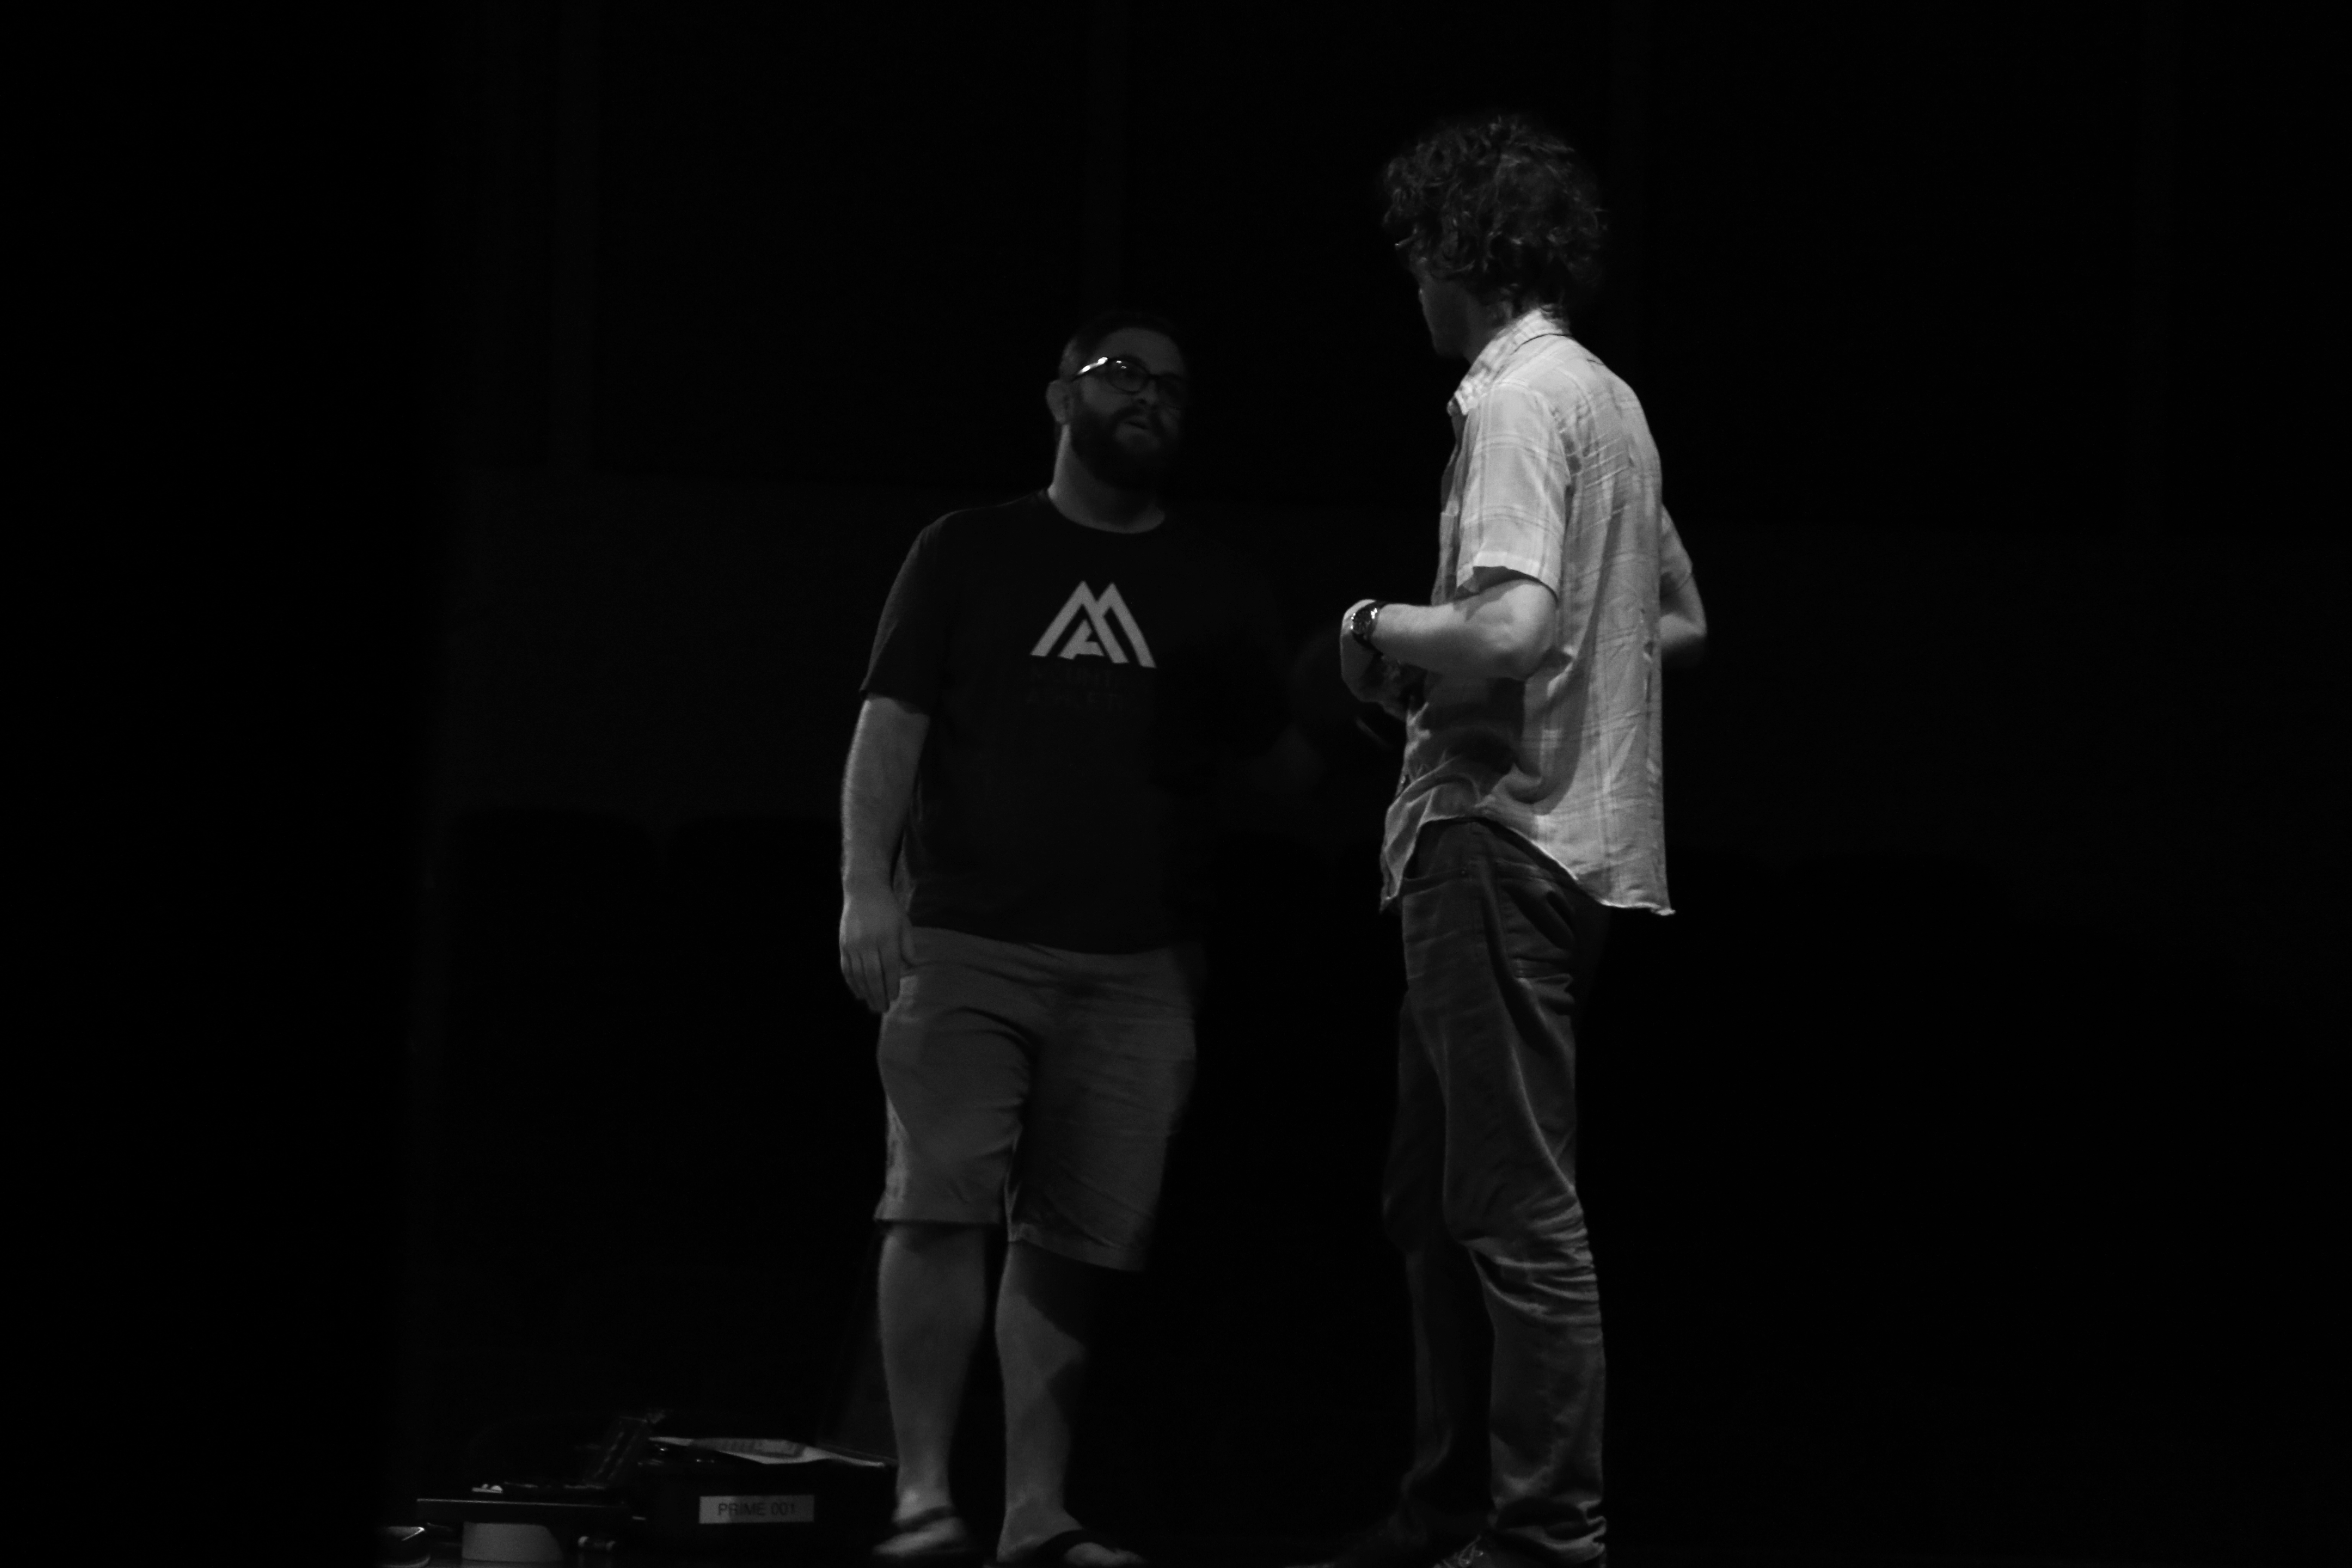 Writers Johnathan Paul and David Goodman discuss scenes during production of The Great Hanging.